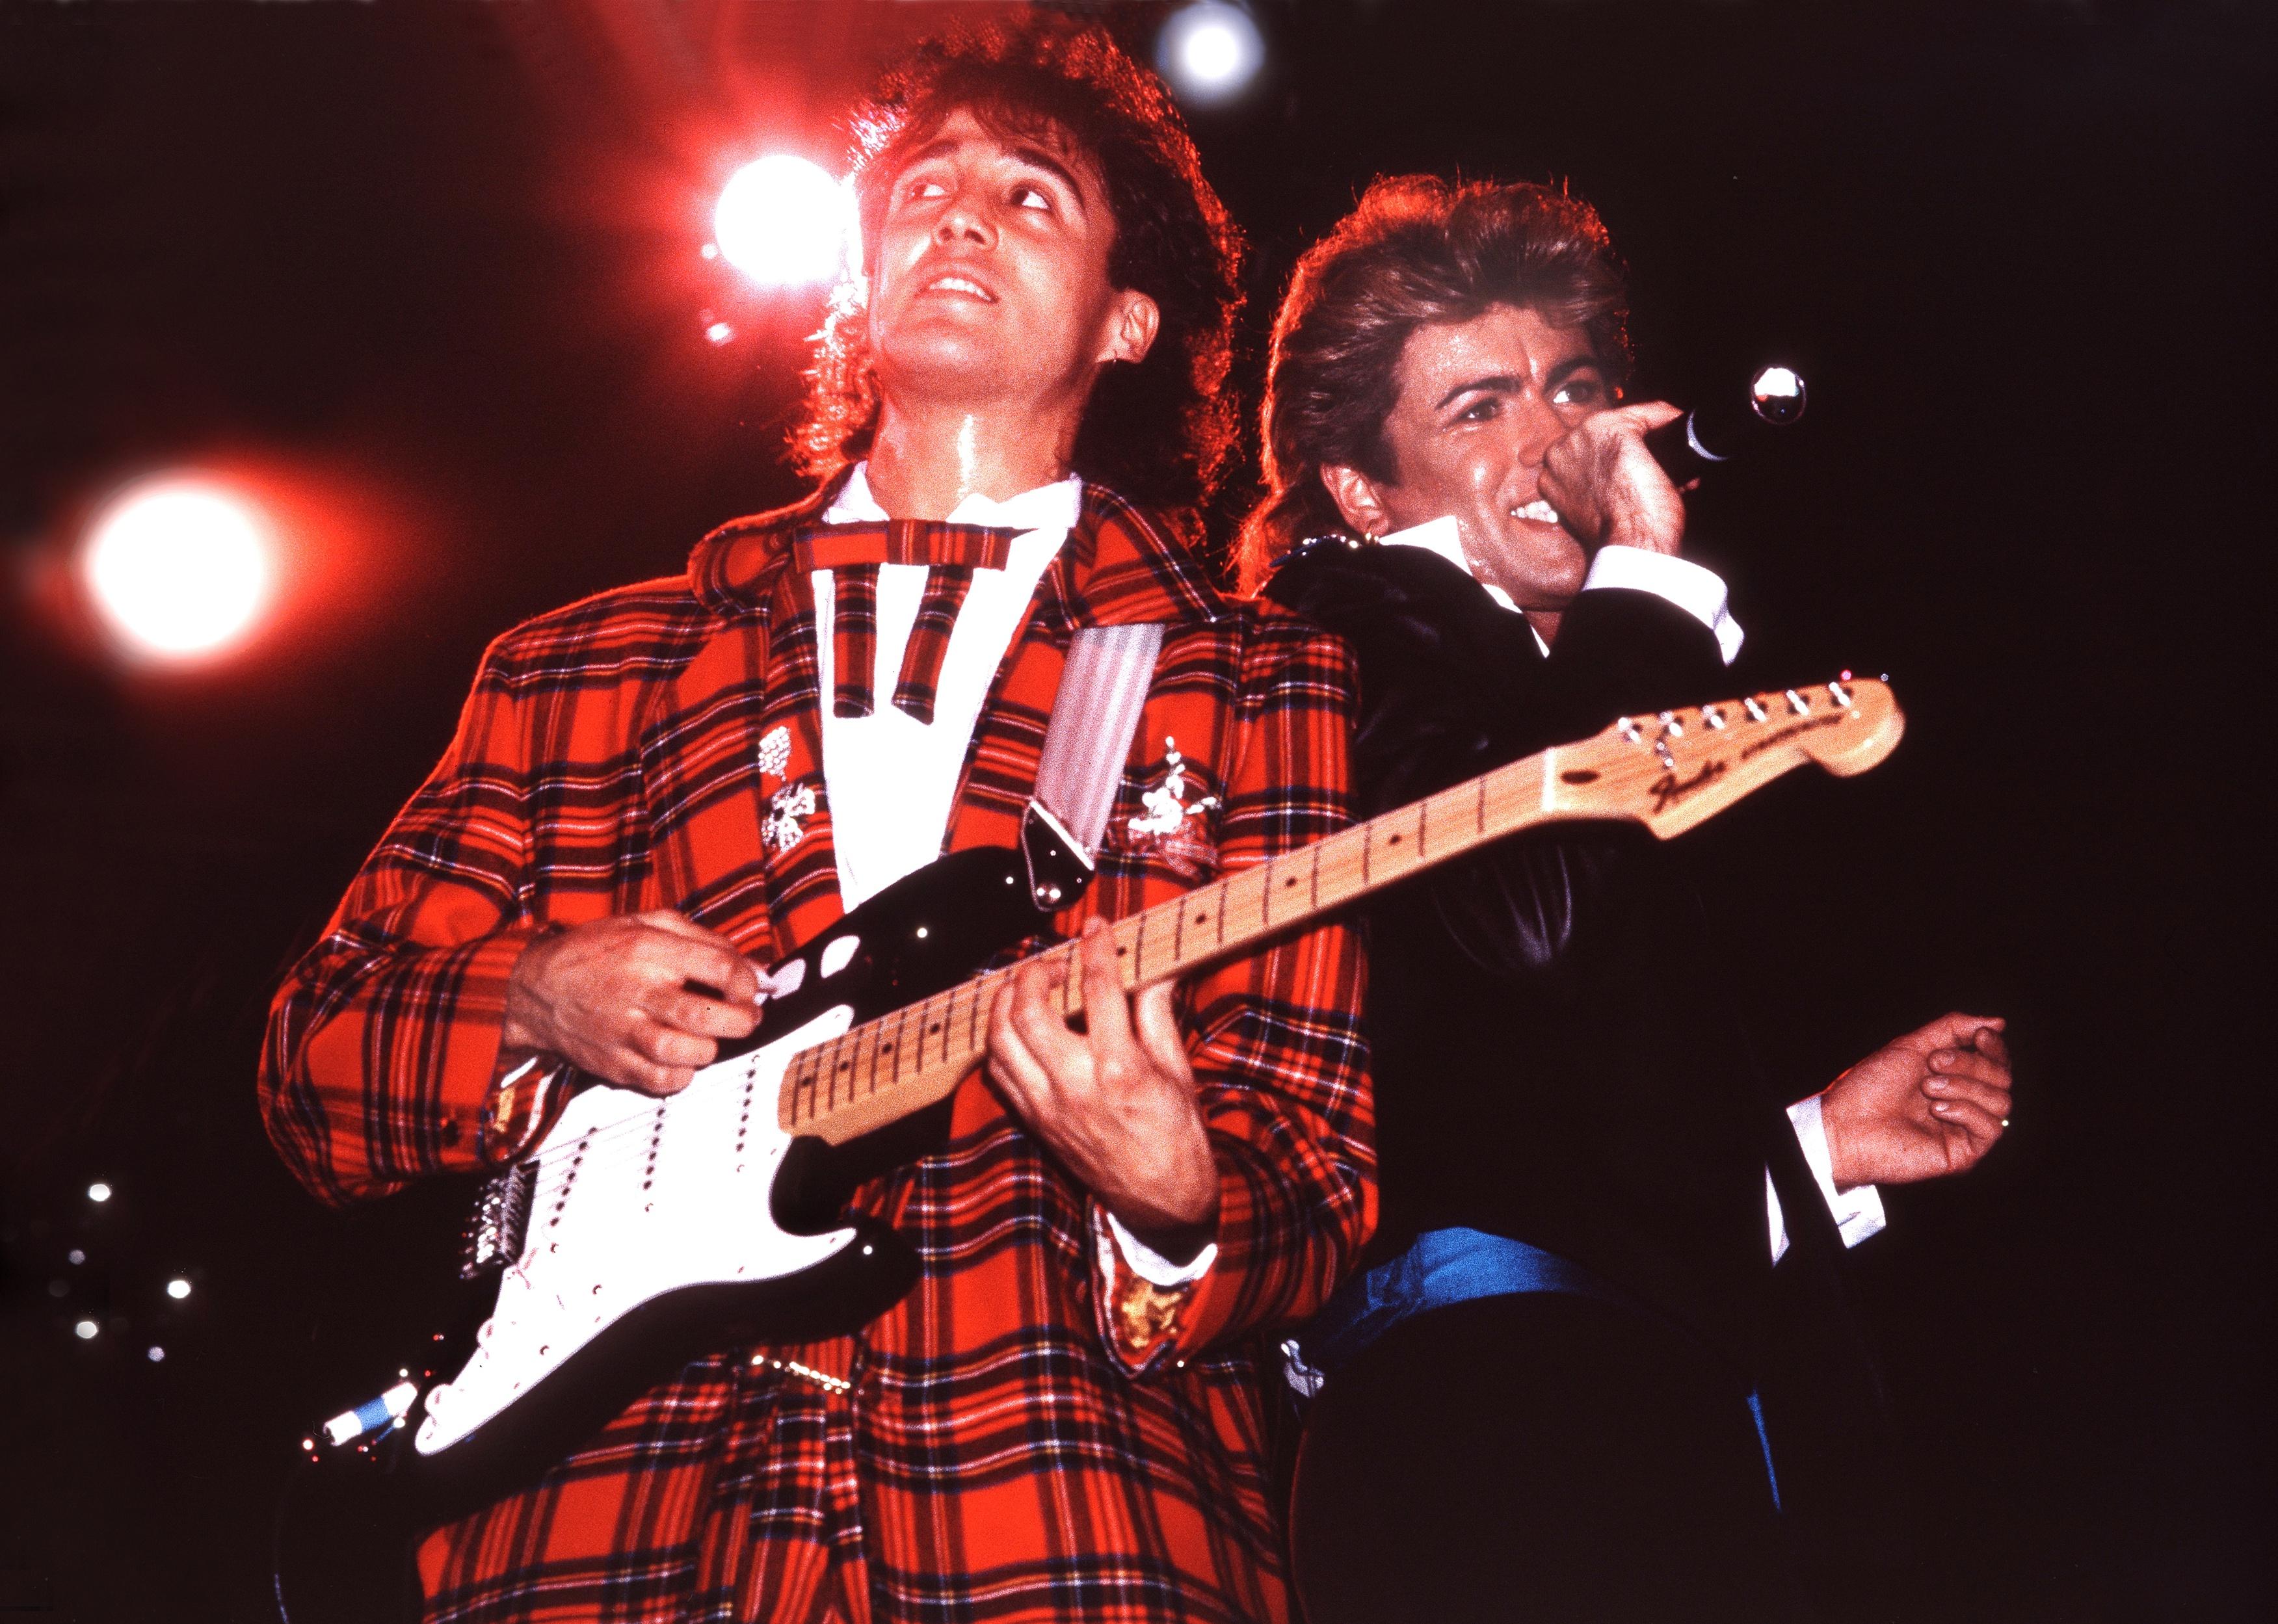 George Michael and Andrew Ridgeley performing on stage.